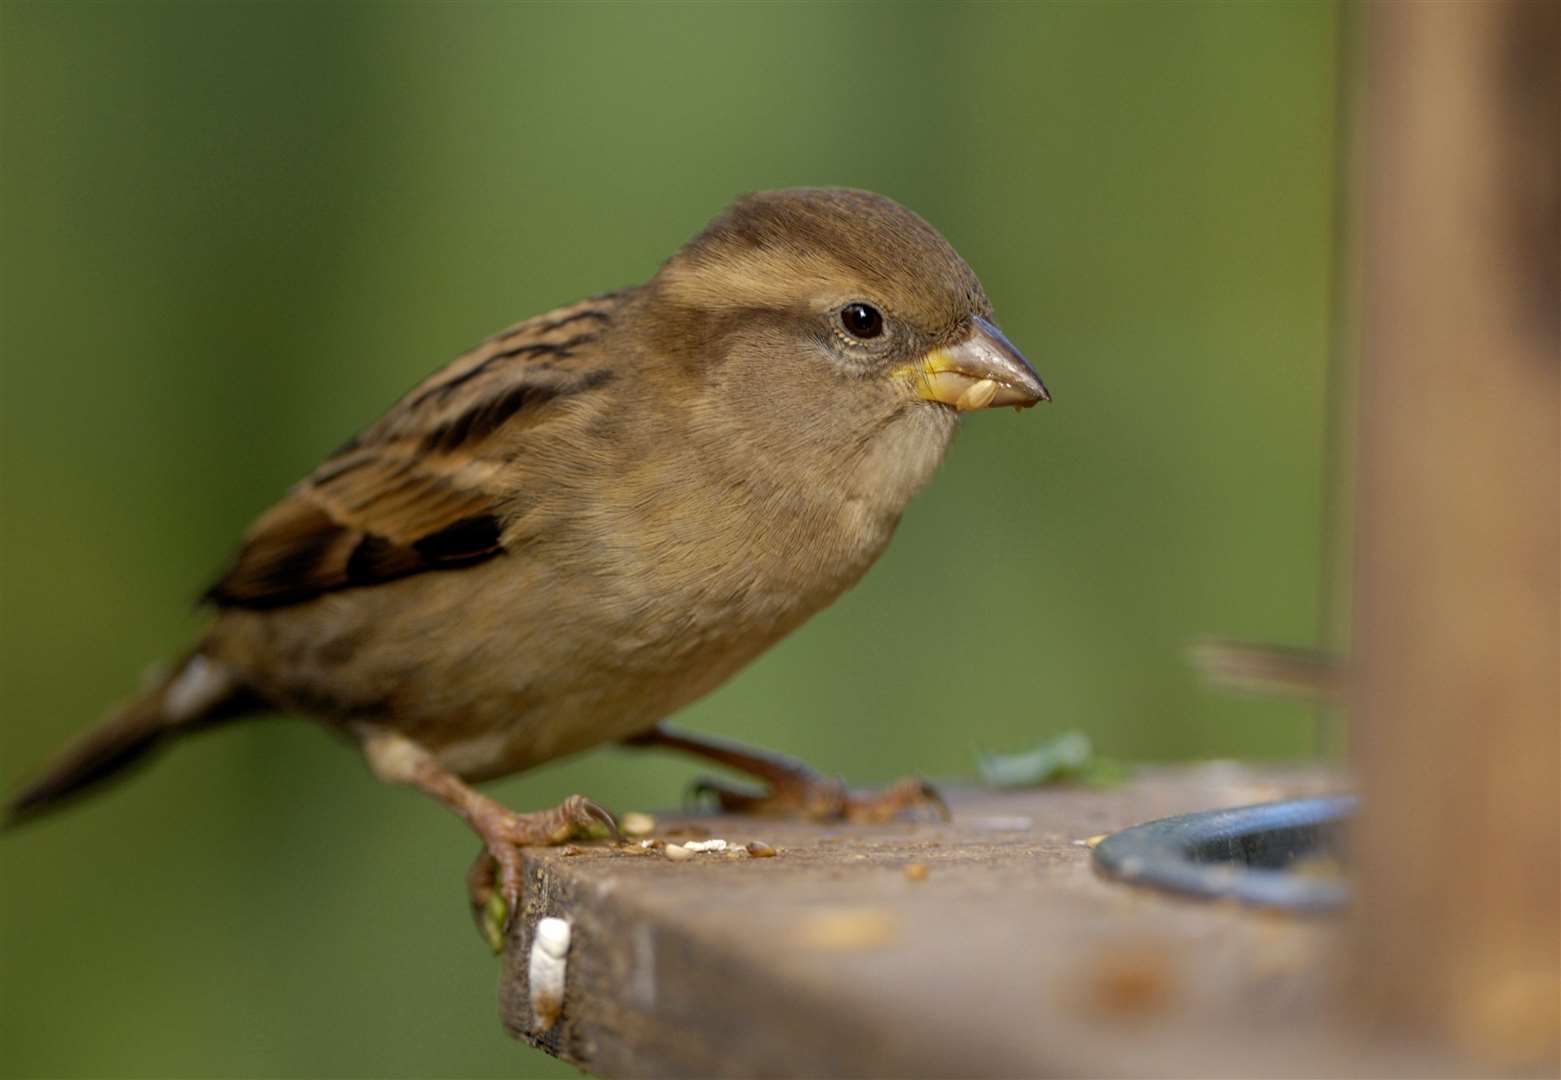 The House Sparrow feeding in a garden. Image: Ray Kennedy (RSPB images).